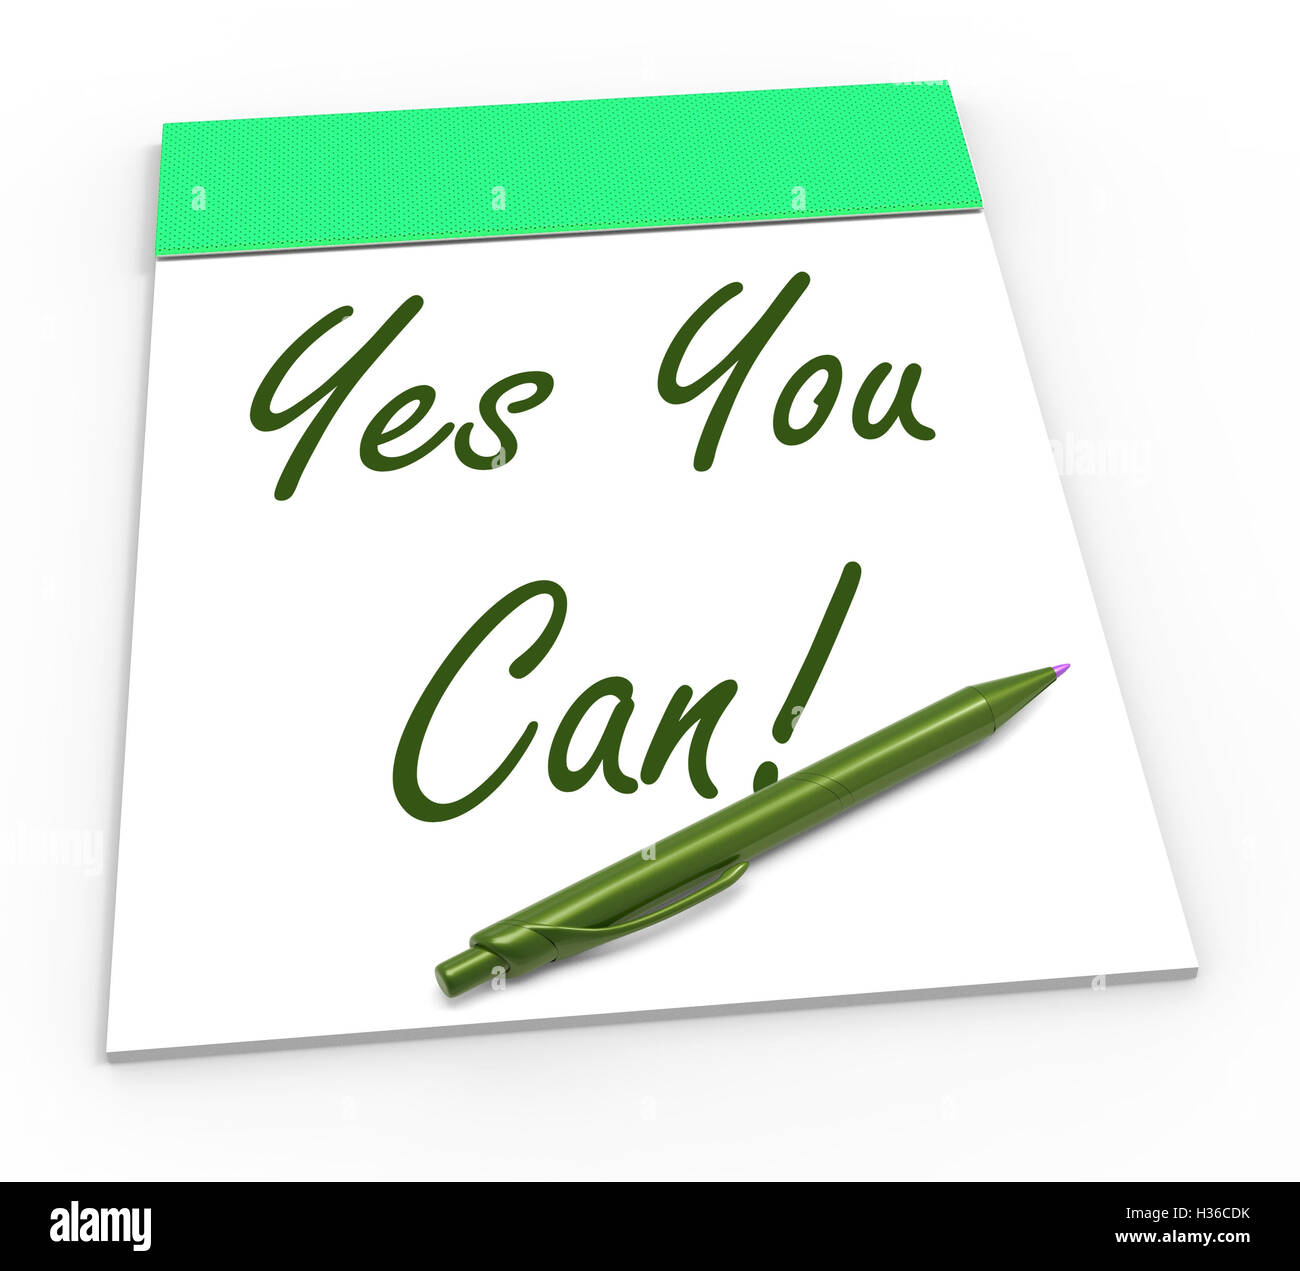 Yes You Can Notepad Shows Self-Belief And Confidence Stock Photo